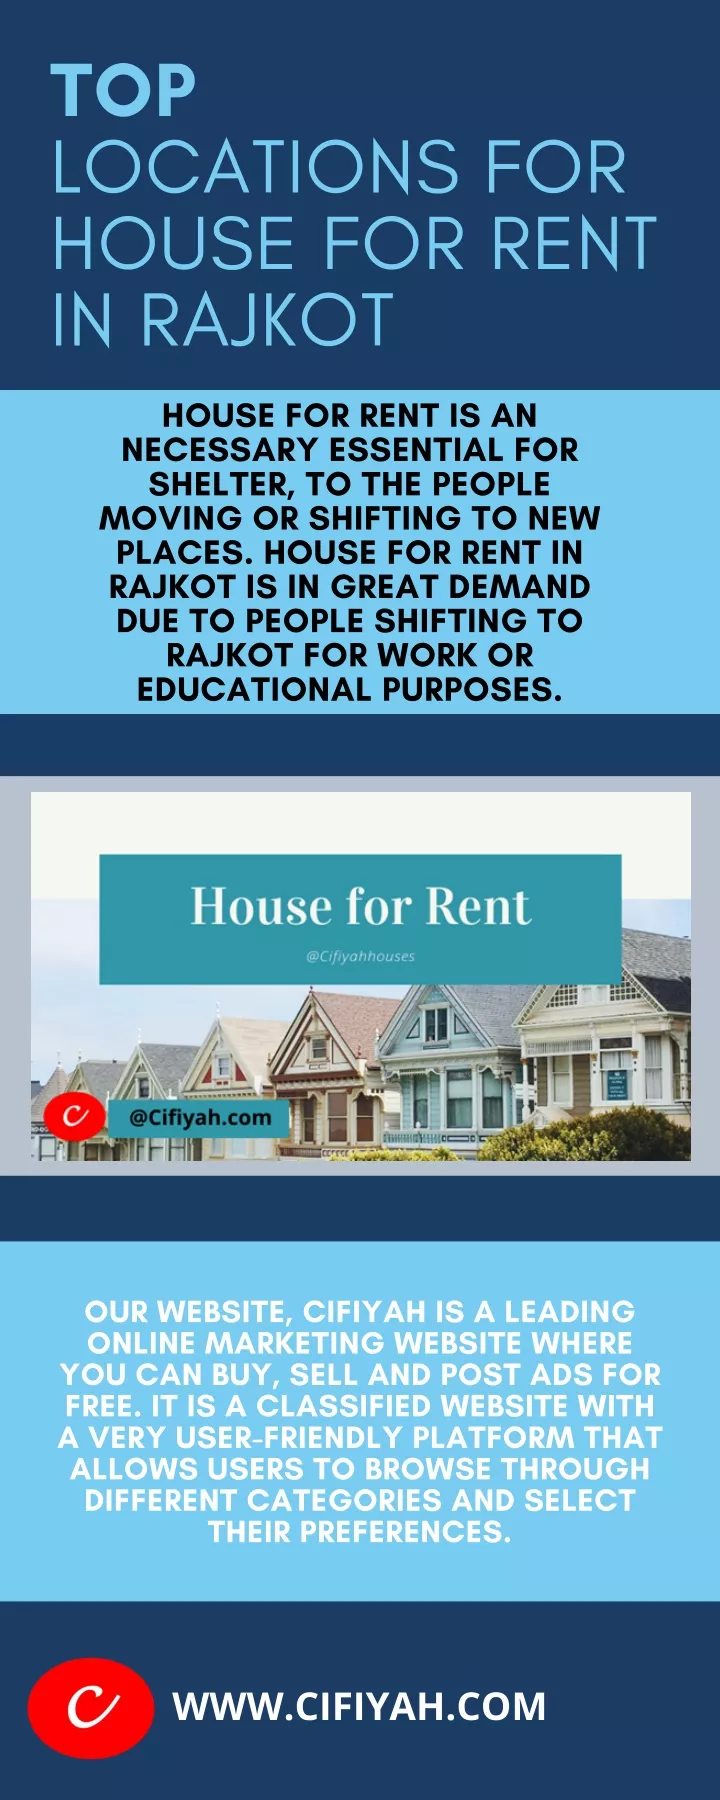 top locations for house for rent in rajkot